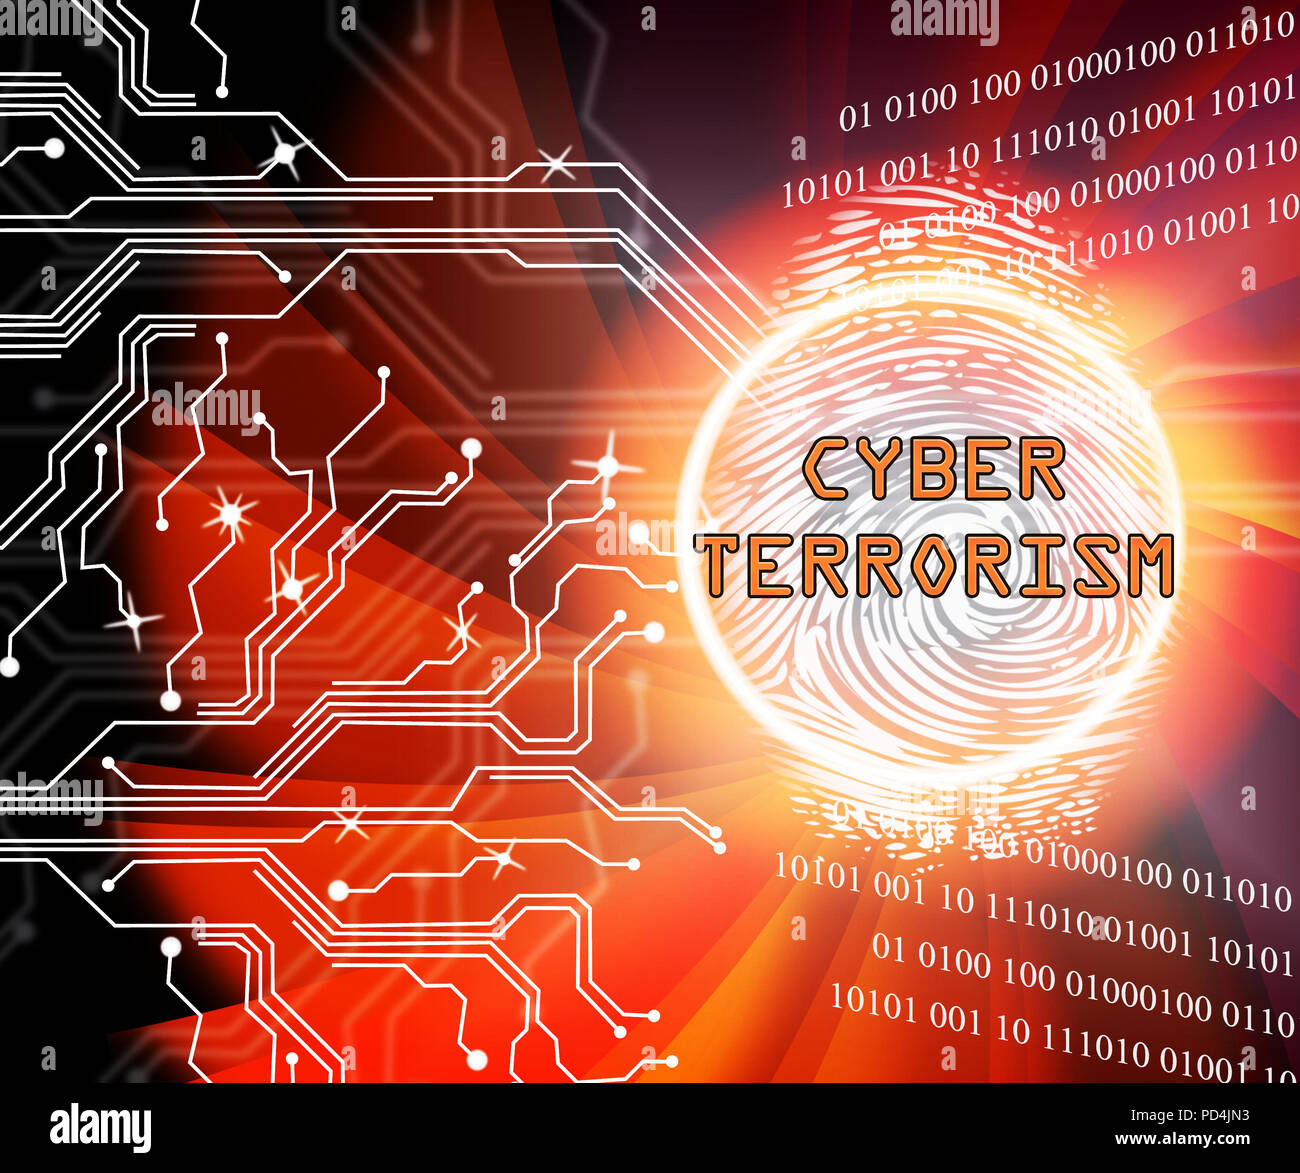 Cyber Terrorism Online Terrorist Crime 3d Illustration Shows Criminal Extremists In A Virtual War Using Espionage And Extortion Stock Photo